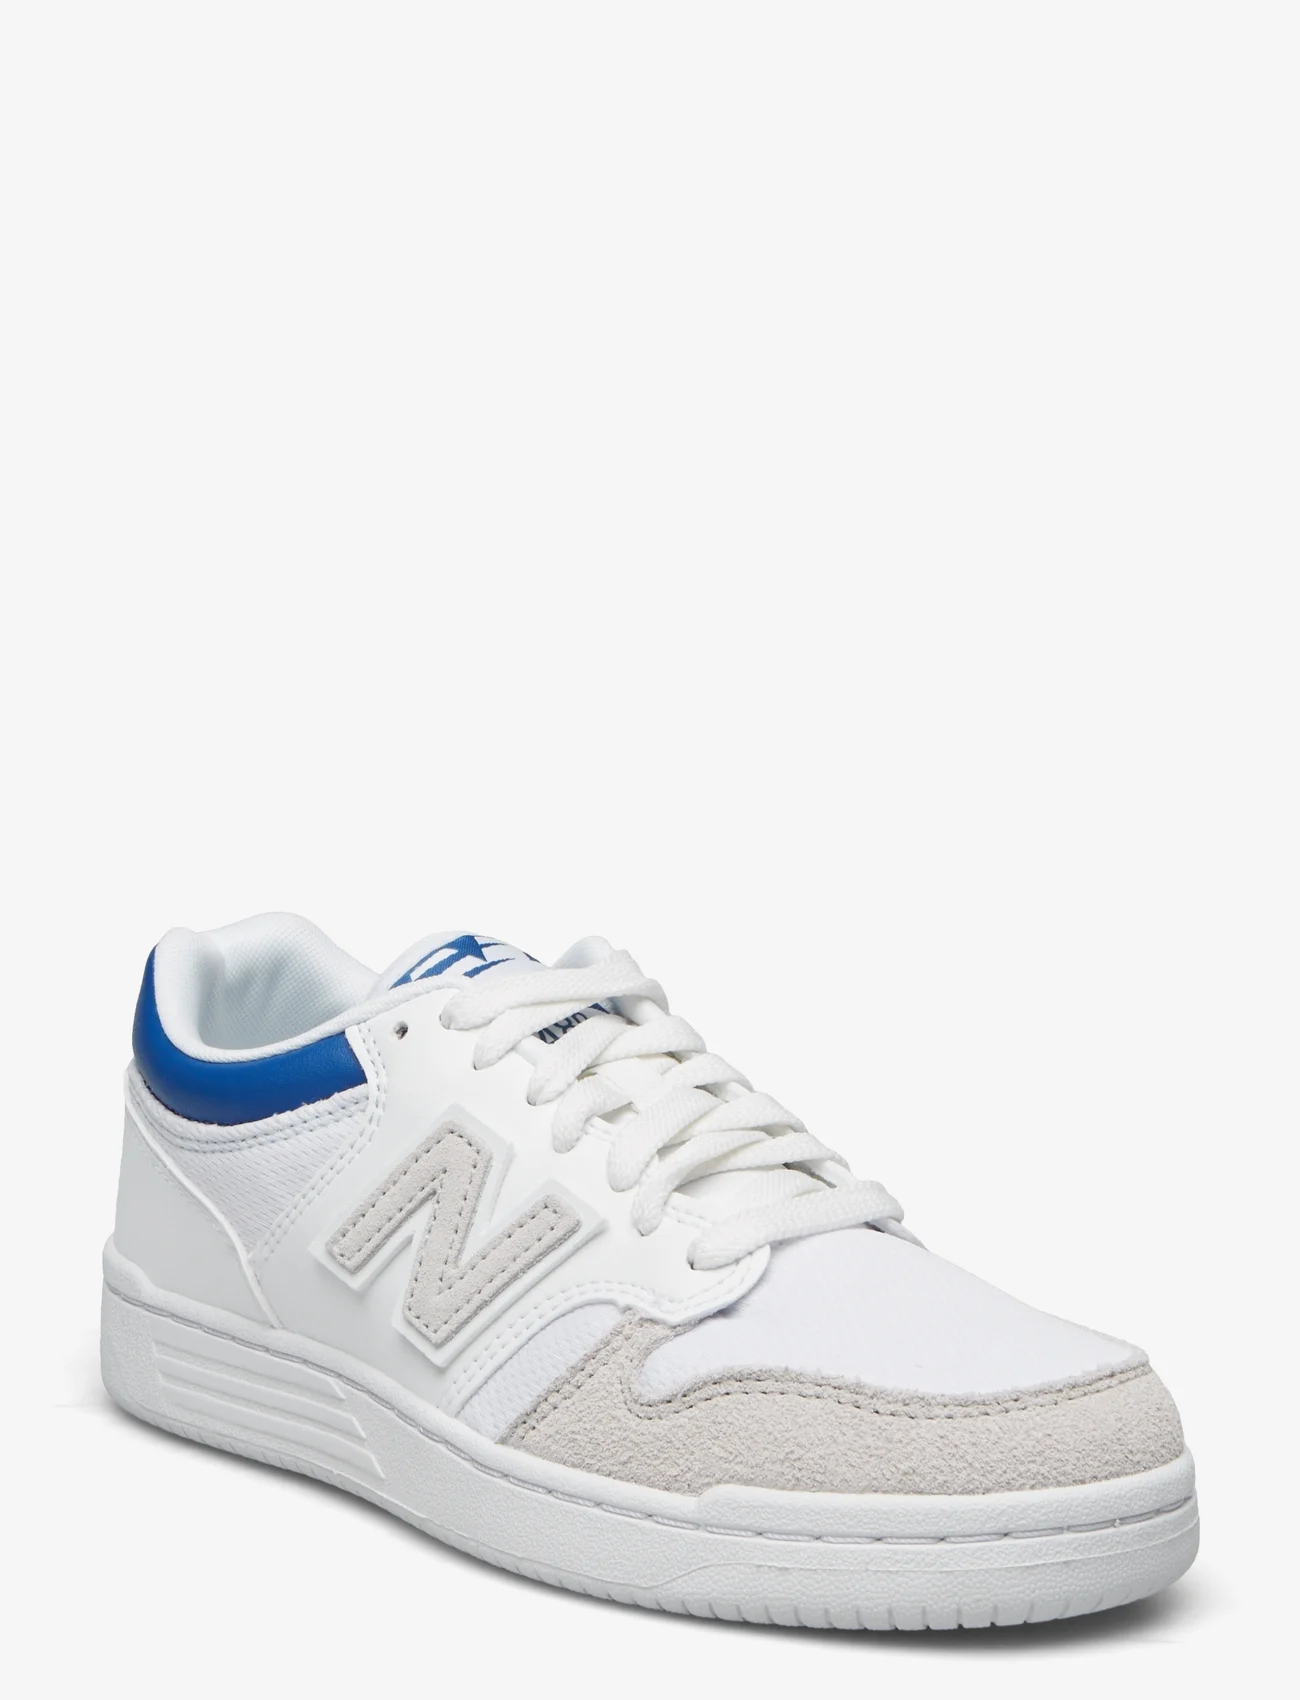 New Balance - New Balance BB480 - low top sneakers - white - 0